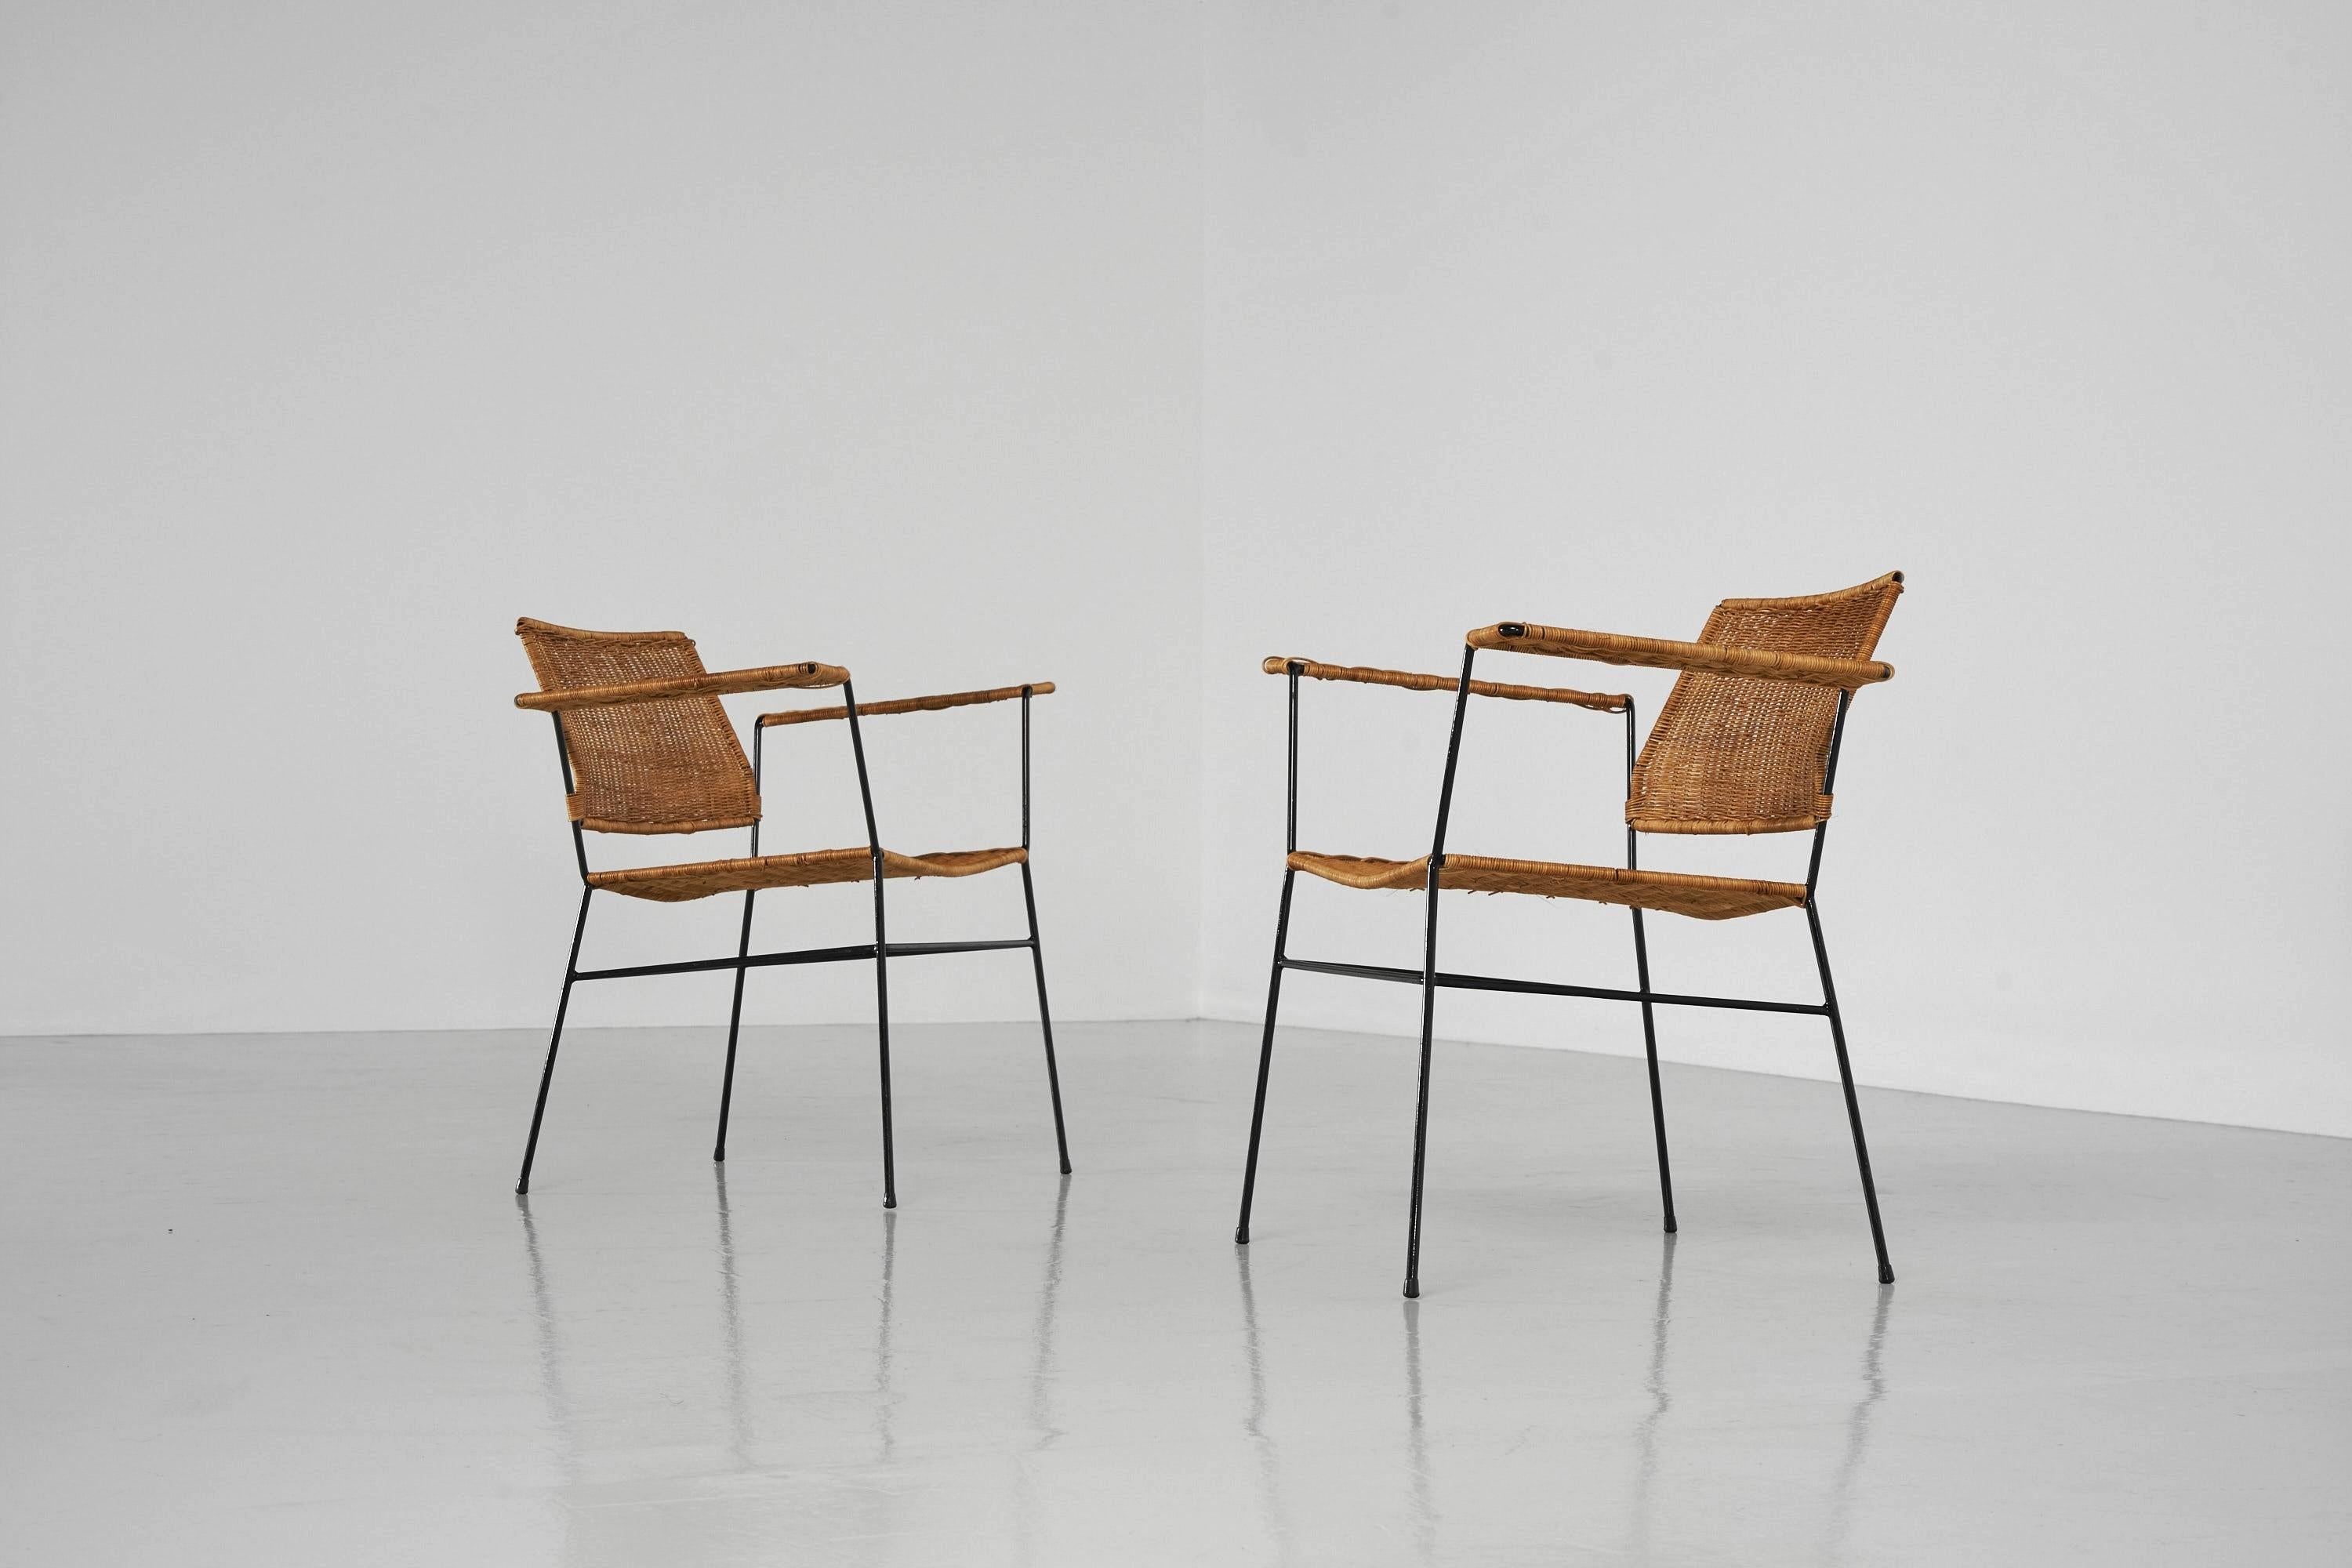 Fantastic pair of armchairs designed by Herta Maria Witzemann and manufactured by Wilde & Spieth, Germany 1954. The chairs have solid metal frames and hand-woven cane seats and armrests which is in fantastic condition with a great patina to it. The